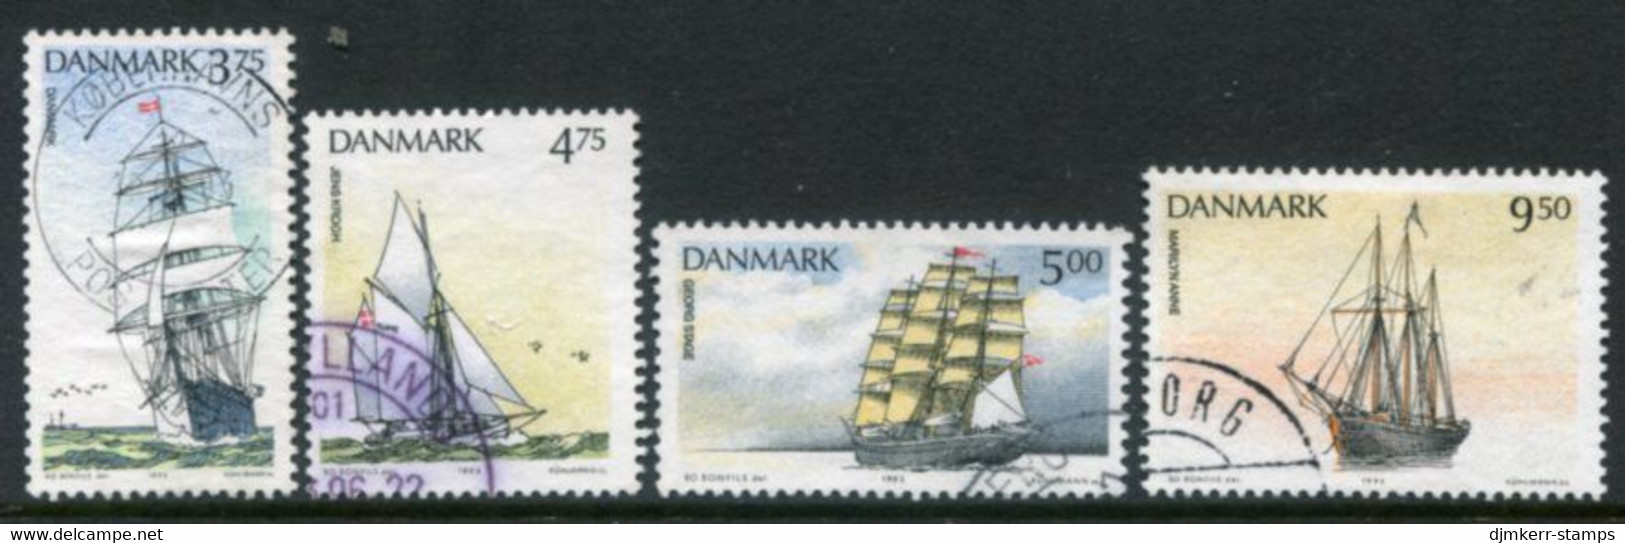 DENMARK 1993 Sailing Ships Used. Michel 1057-60 - Used Stamps